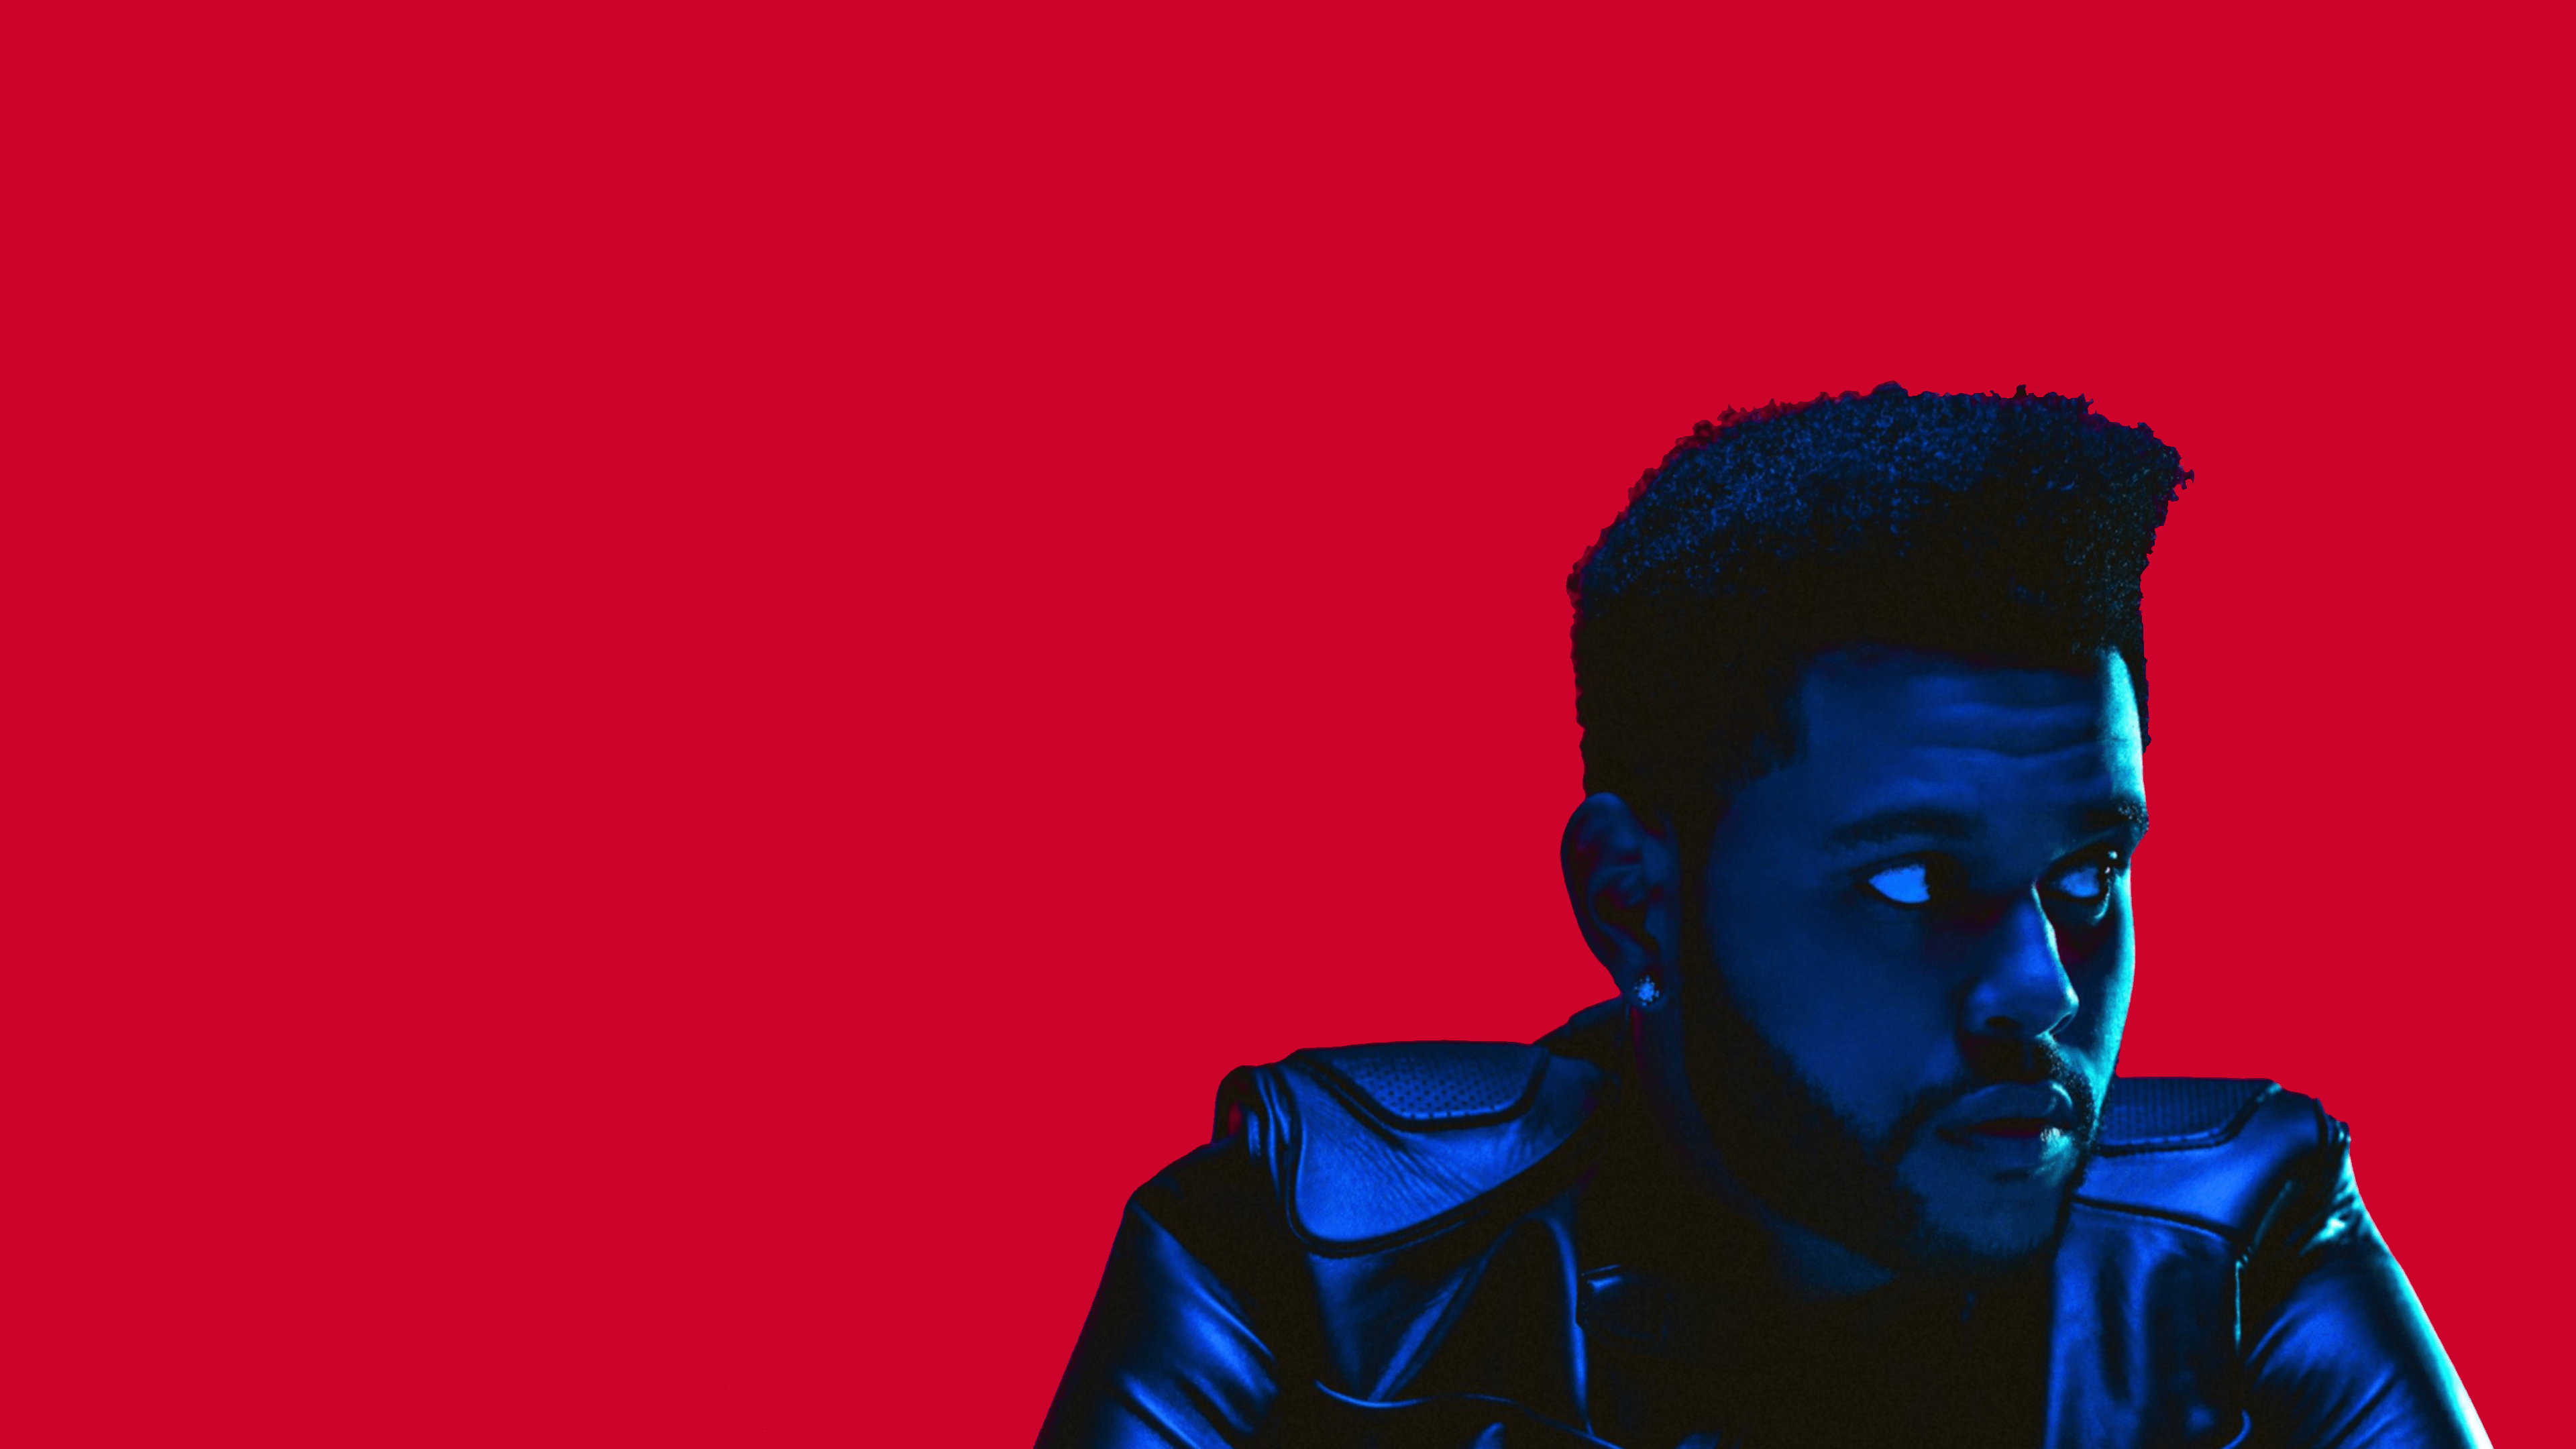 The Weeknd Laptop Wallpaper Free The Weeknd Laptop Background